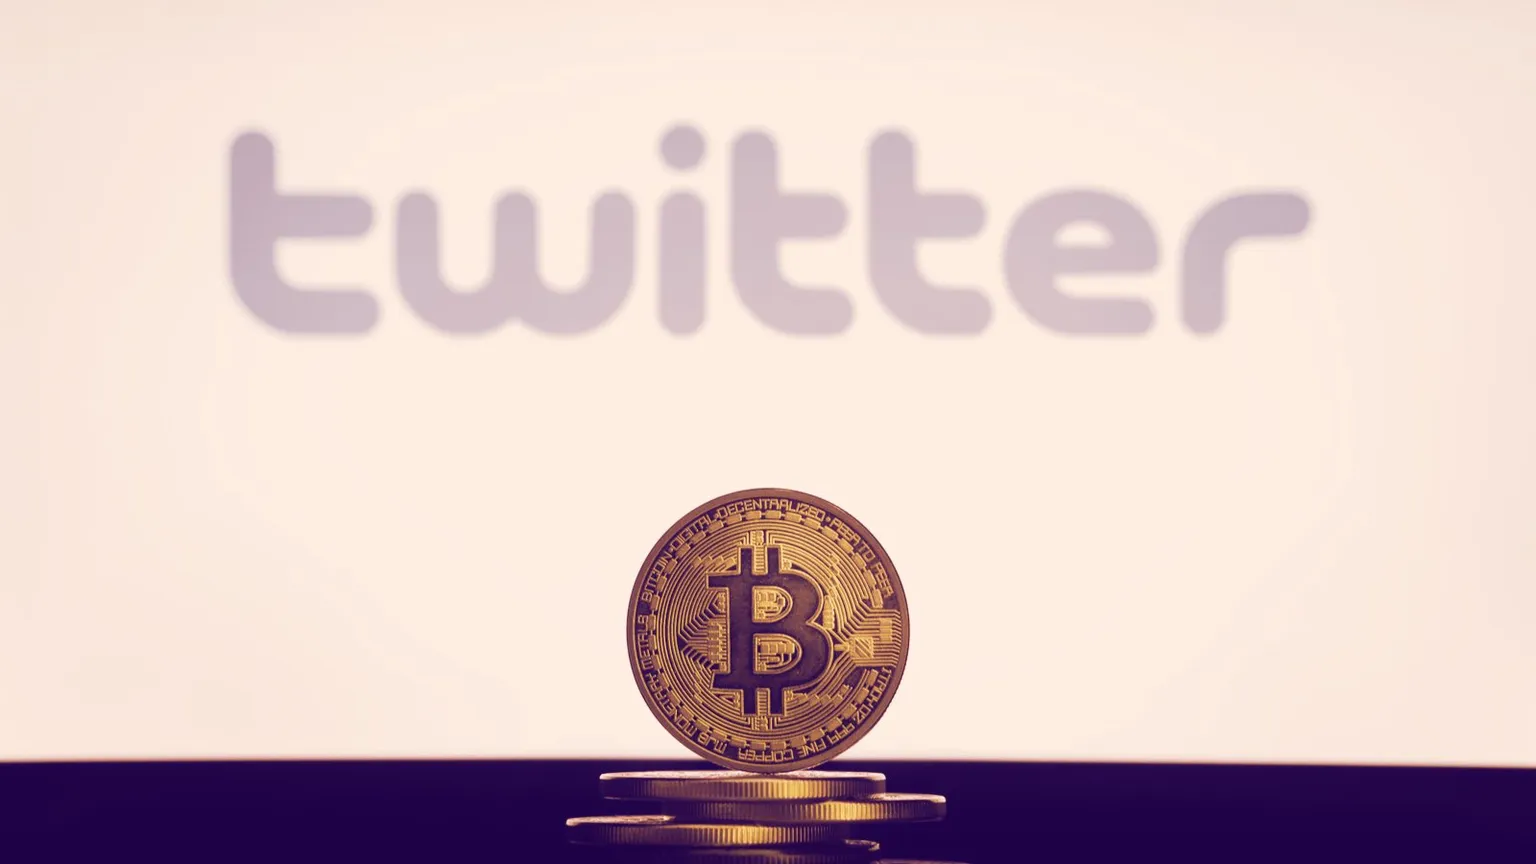 Bitcoin is popular among a subset of Twitter users. Image: Shutterstock